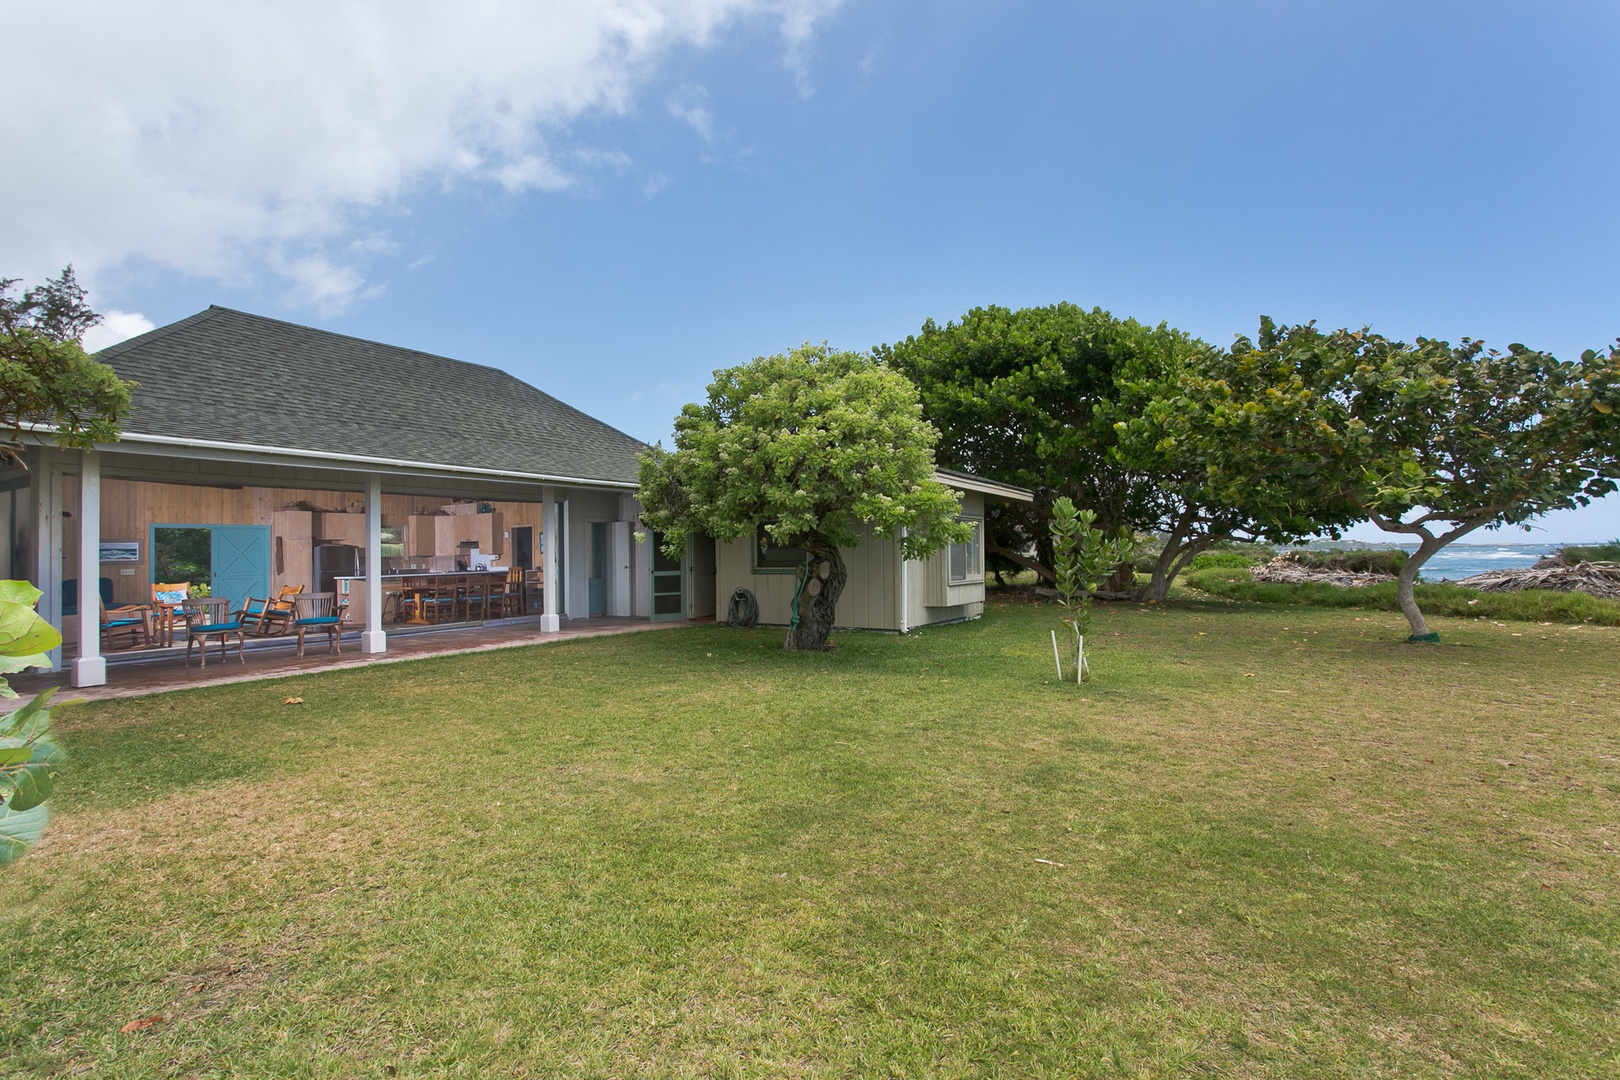 Laie Vacation Rentals, Waipuna Hale - Waipuna Cottage, with oceanfront views.